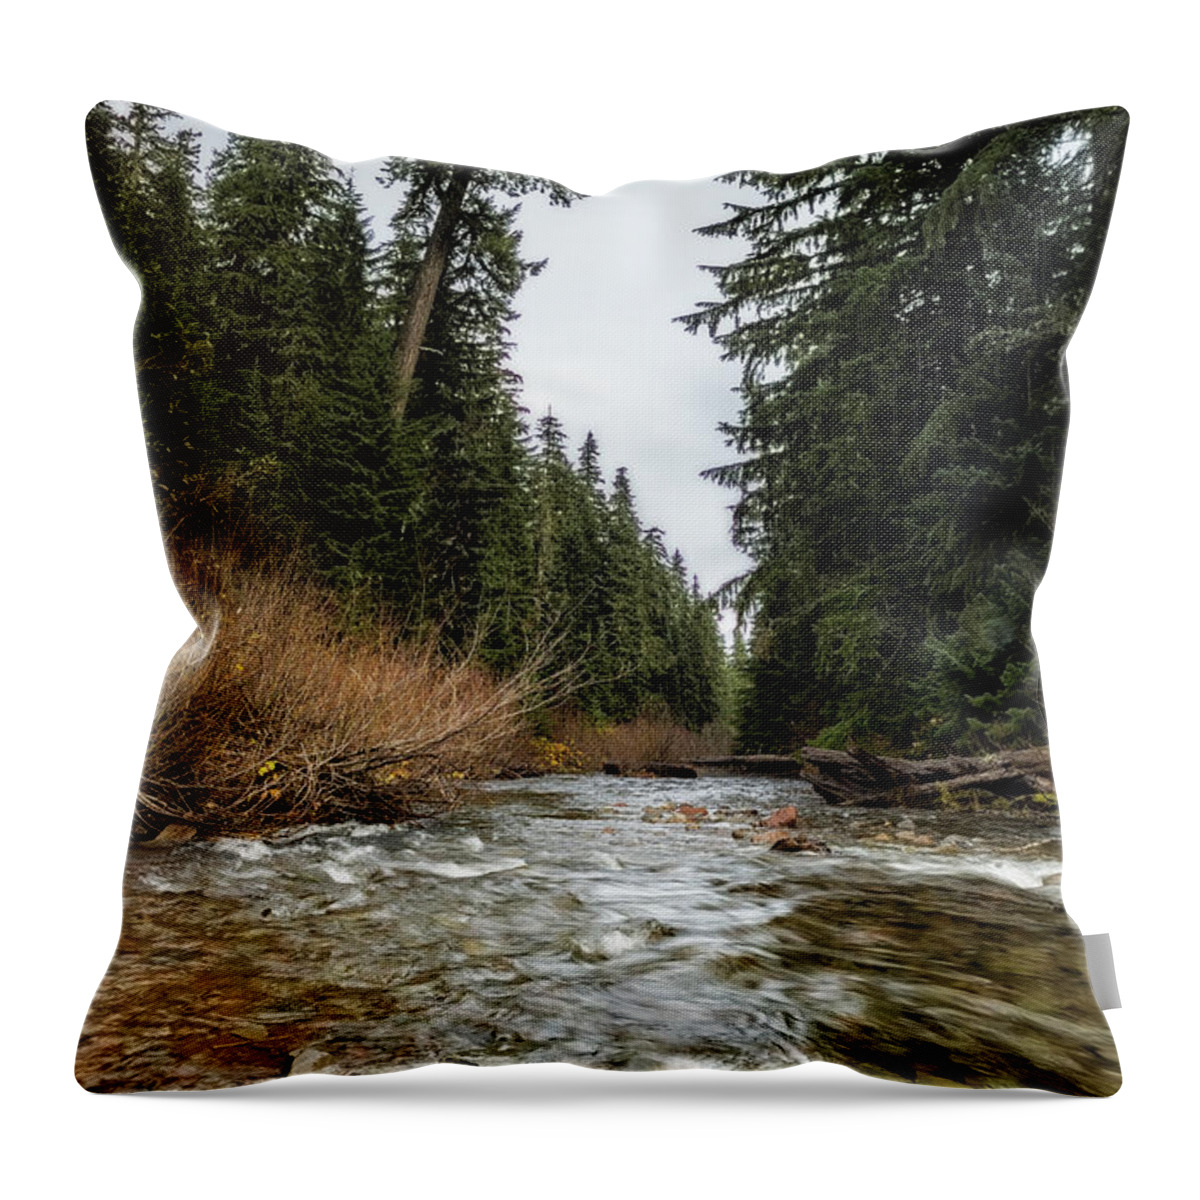 Hackleman Creek Throw Pillow featuring the photograph Hackleman Creek by Belinda Greb